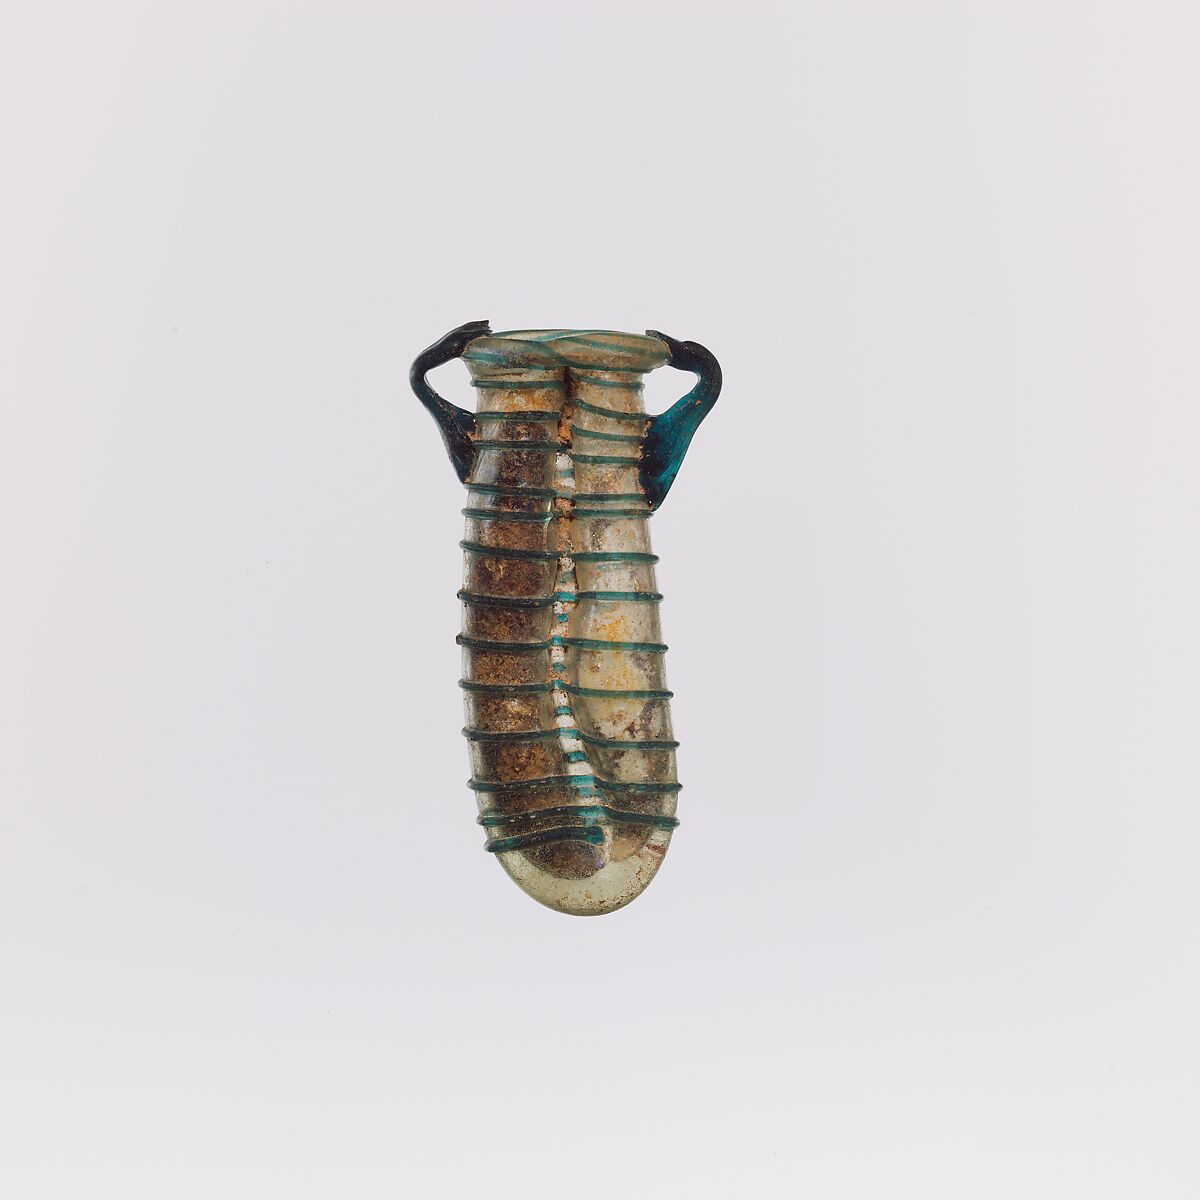 Glass double cosmetic flask (kohl tube), Glass, Roman, Syrian 